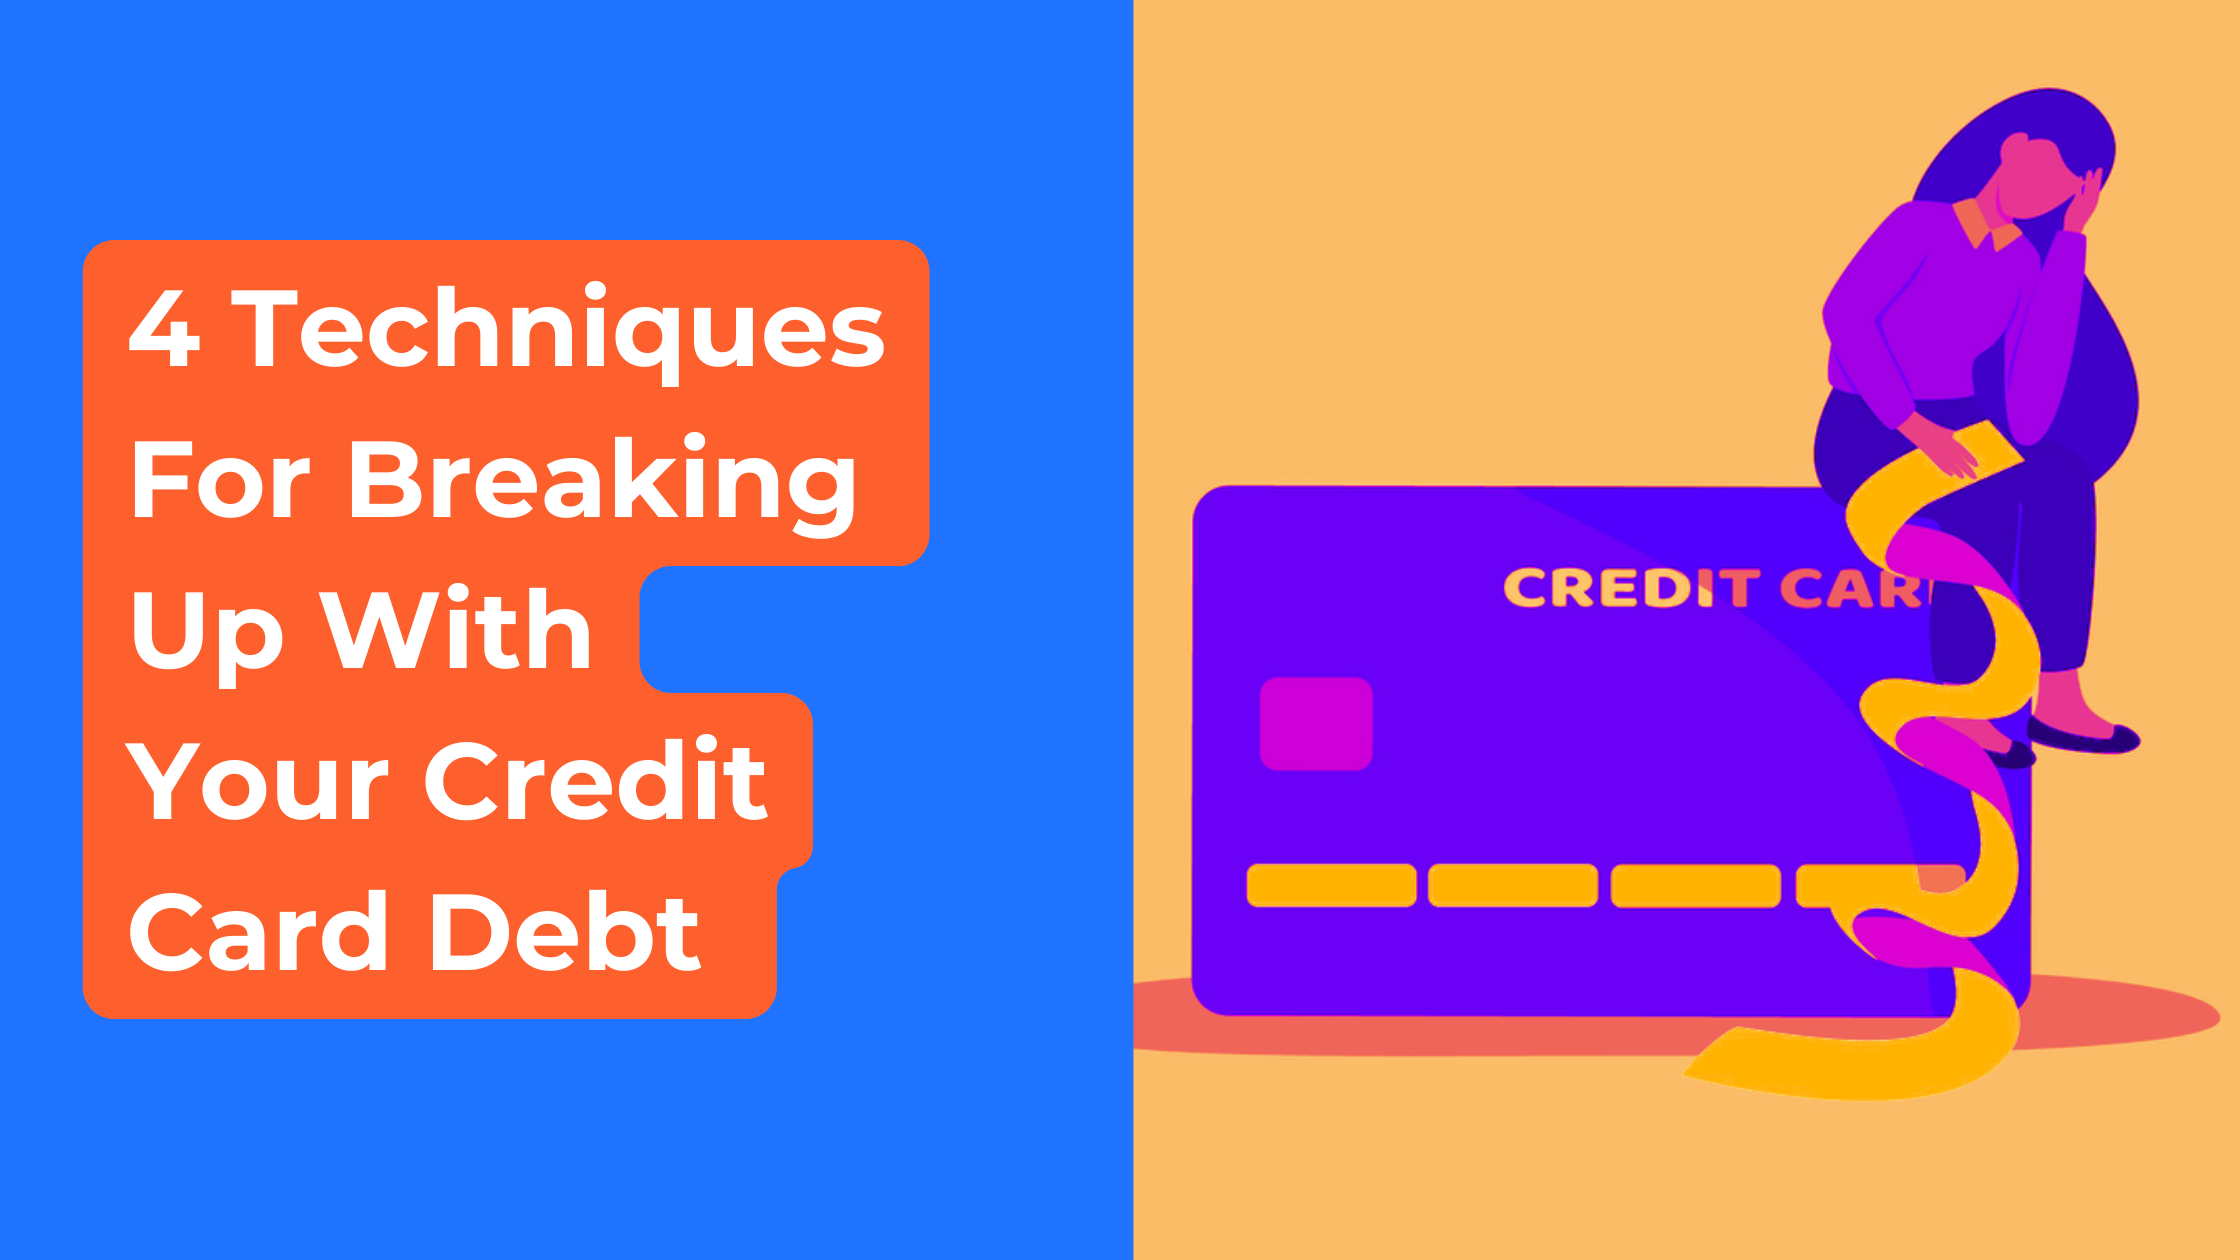 4 Techniques For Breaking Up With Your Credit Card Debt